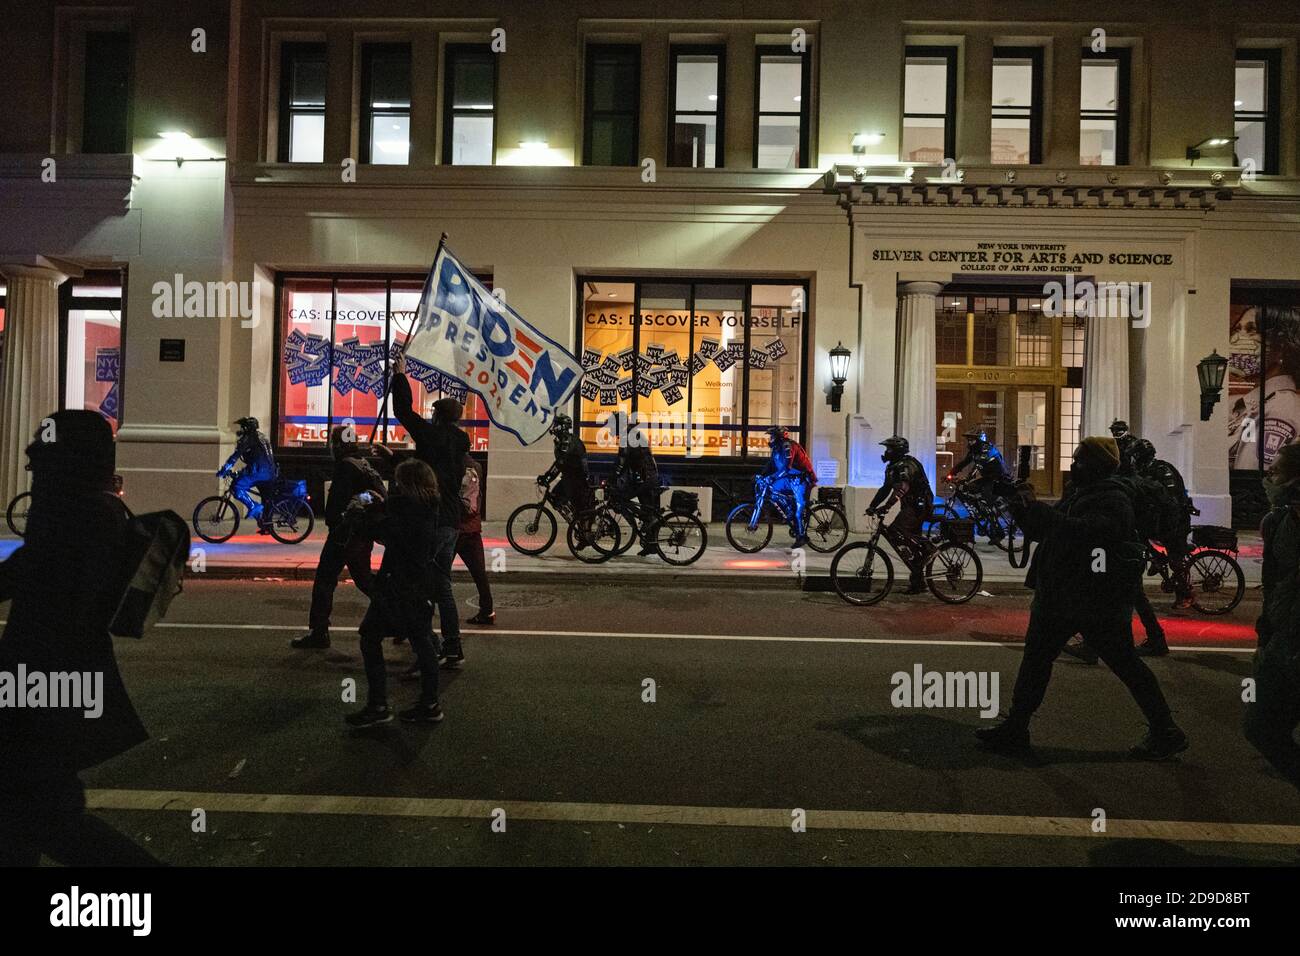 New York, New York, US. Nov 4th 2020. As the US awaits election results, bicycle-mounted police in body armor ride alongside pro-Biden protesters marching through New York City's Greenwich Village neighborhood Stock Photo